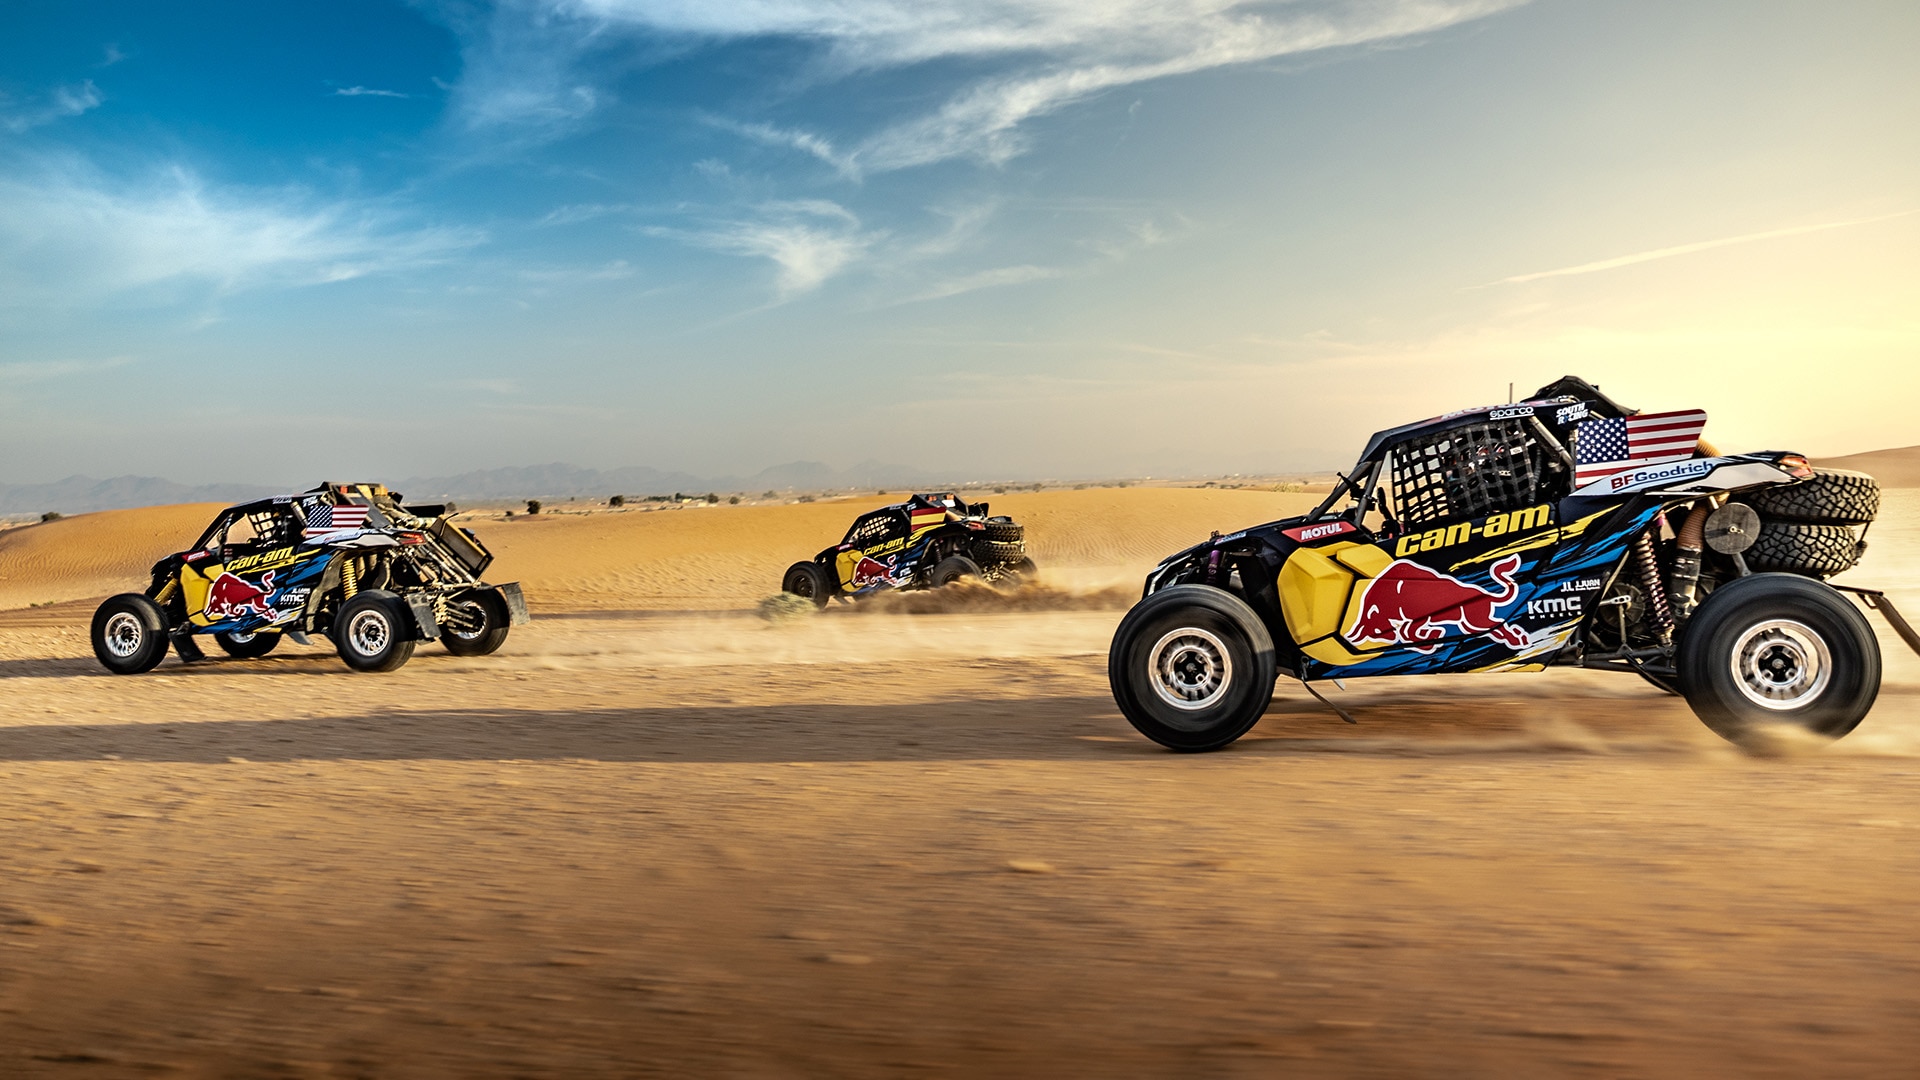 Three Can-Am Maverick X3 side-by-side vehicles racing in the desert